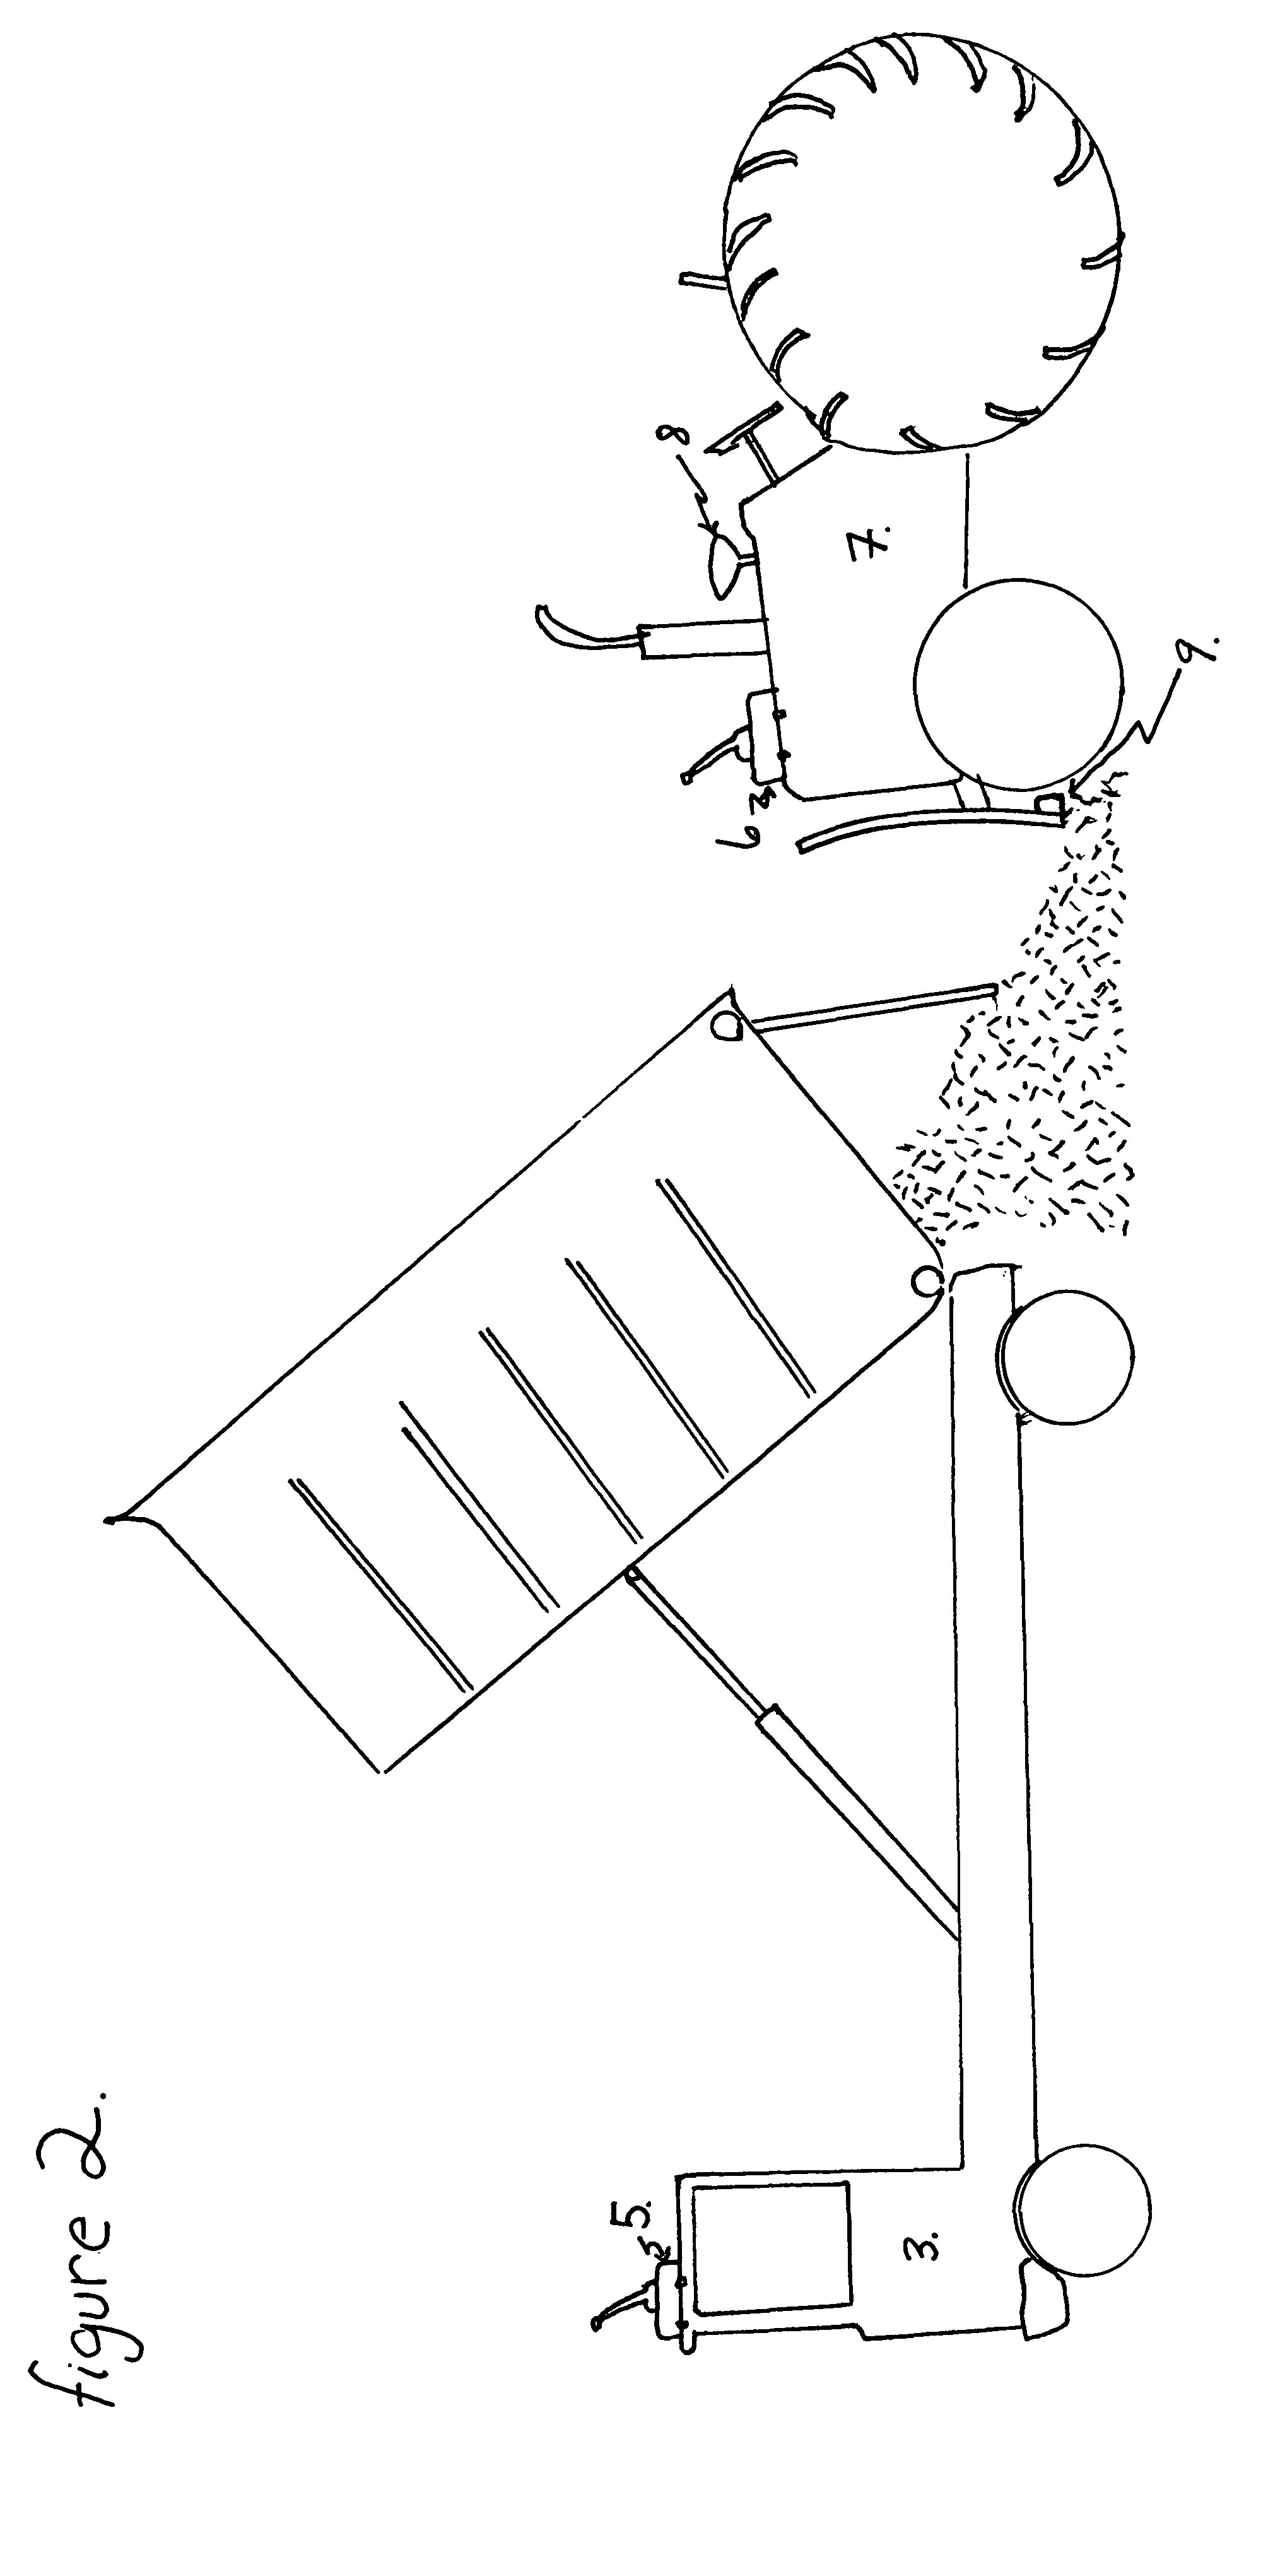 System and method for identifying individual loads of chopped forage in storage